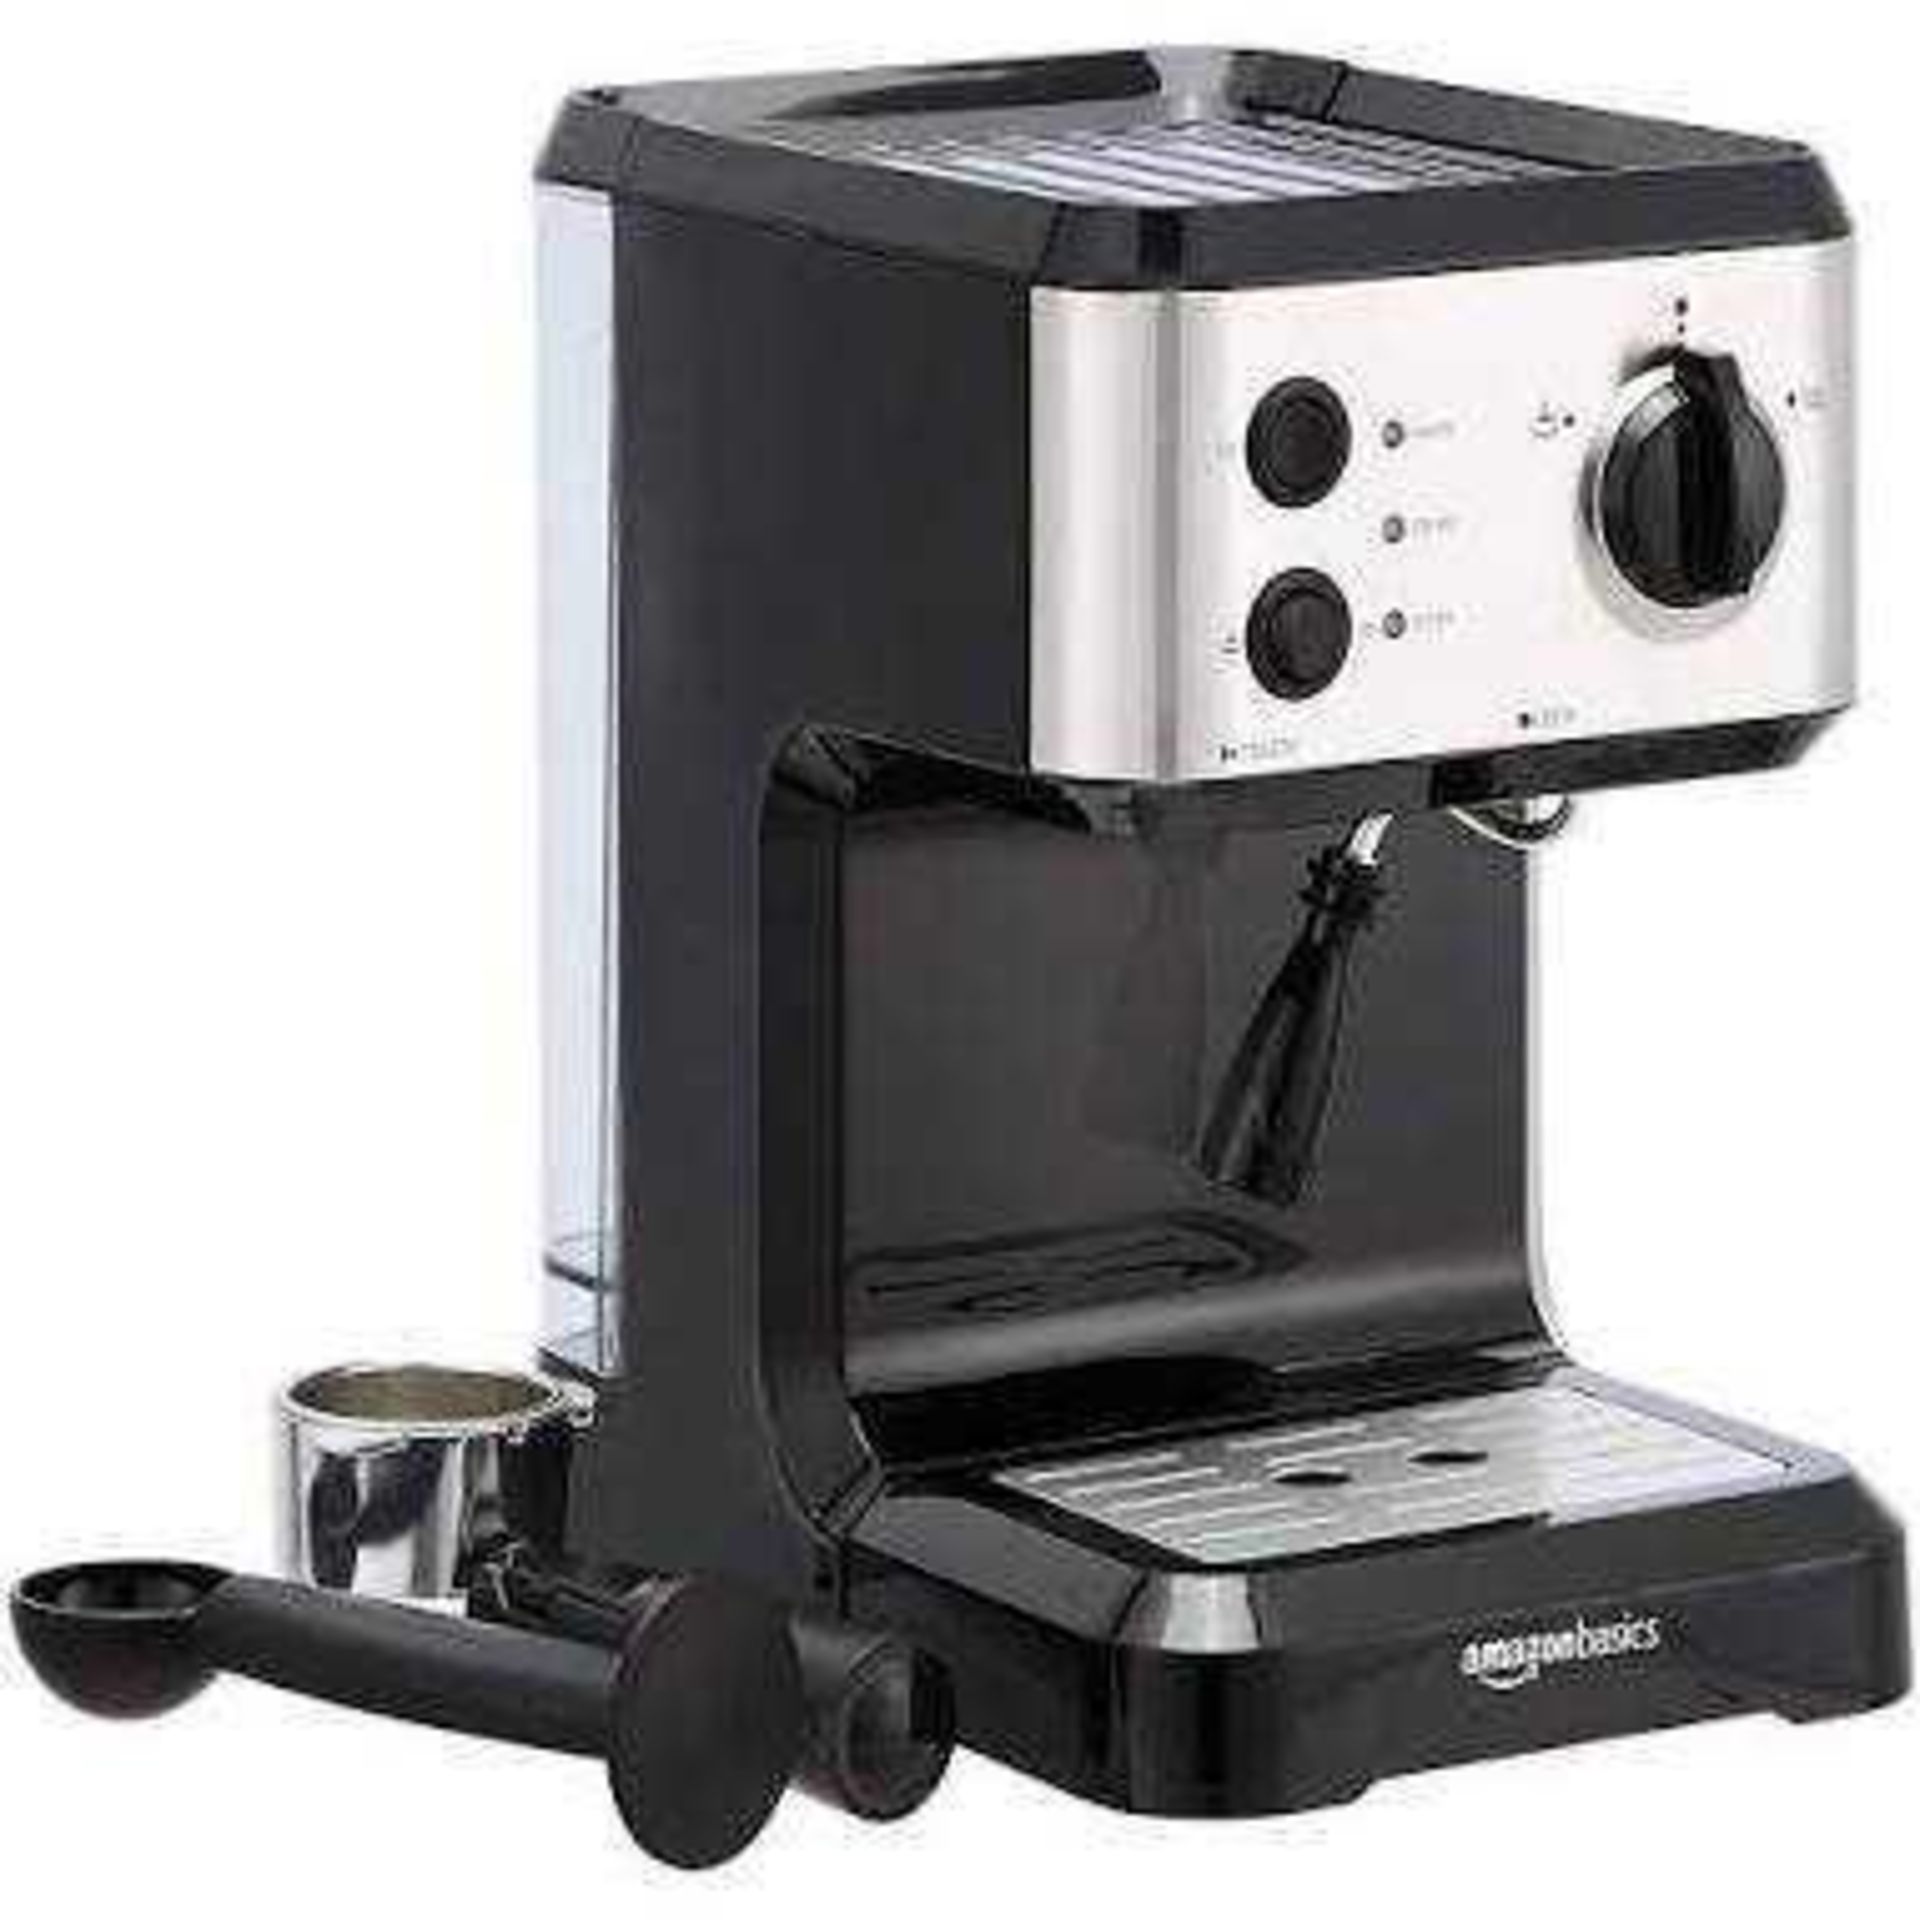 RRP £200 Lot To Contain 2 Boxed Brand New Amazon Basics Espresso Coffee Machine With Milk Frother